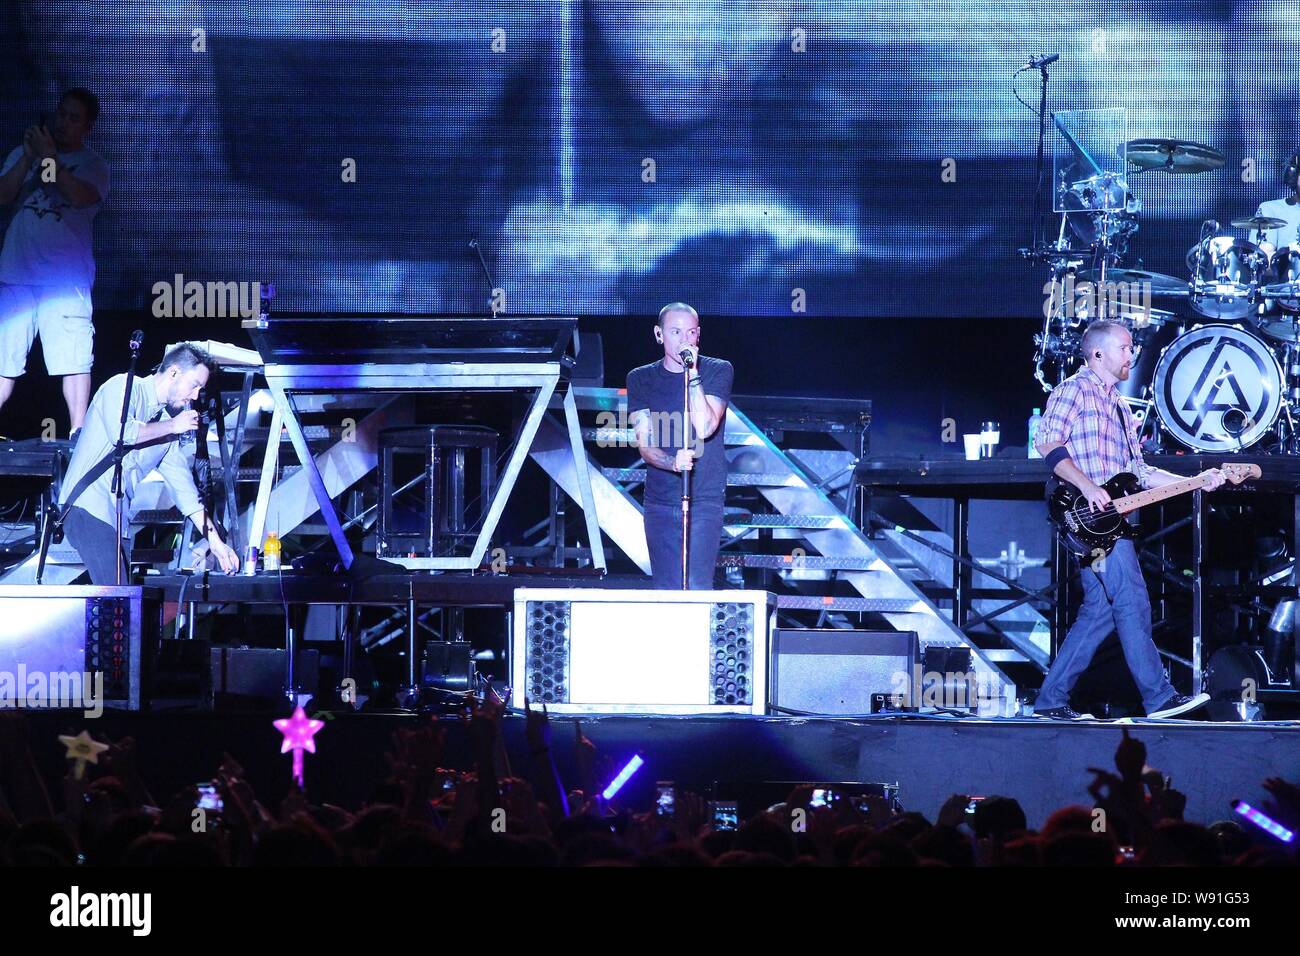 Members of American rock band Linkin Park perform during a concert in Taipei, Taiwan, 17 August 2013. Stock Photo